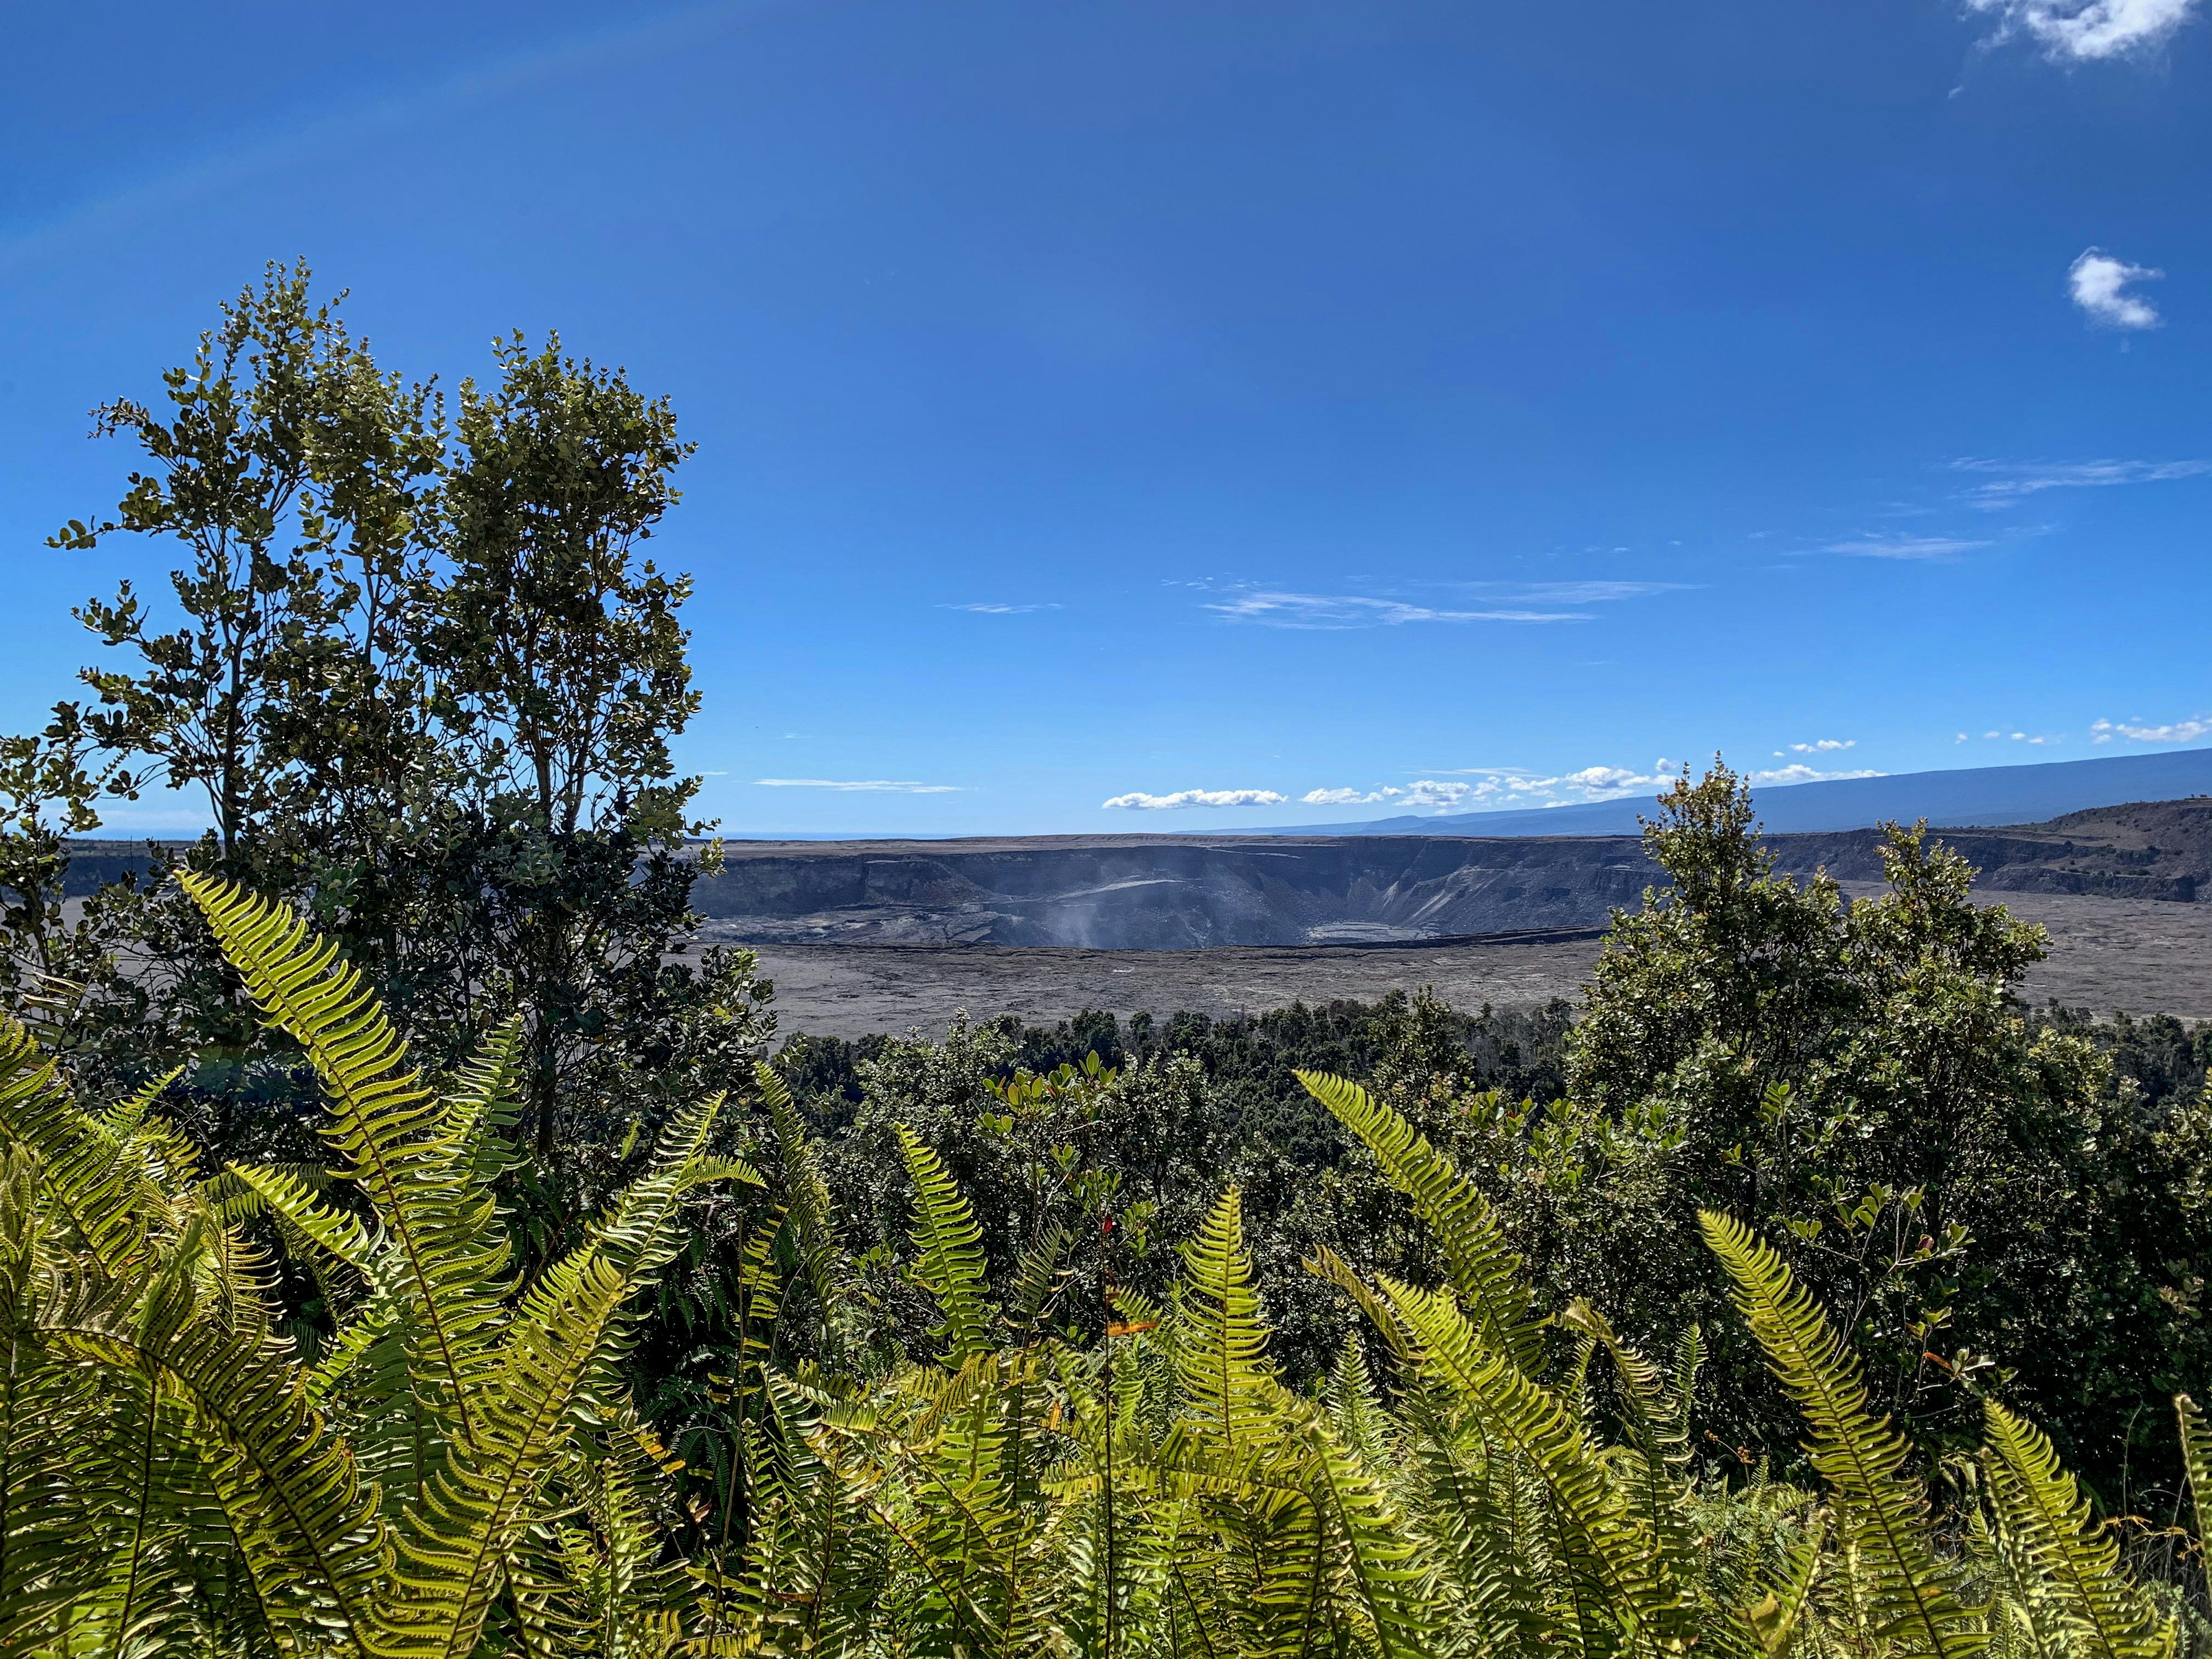 In the foreground are bright green ferns and trees, while steam rises from Kilauea Caldera is visible in the distance.